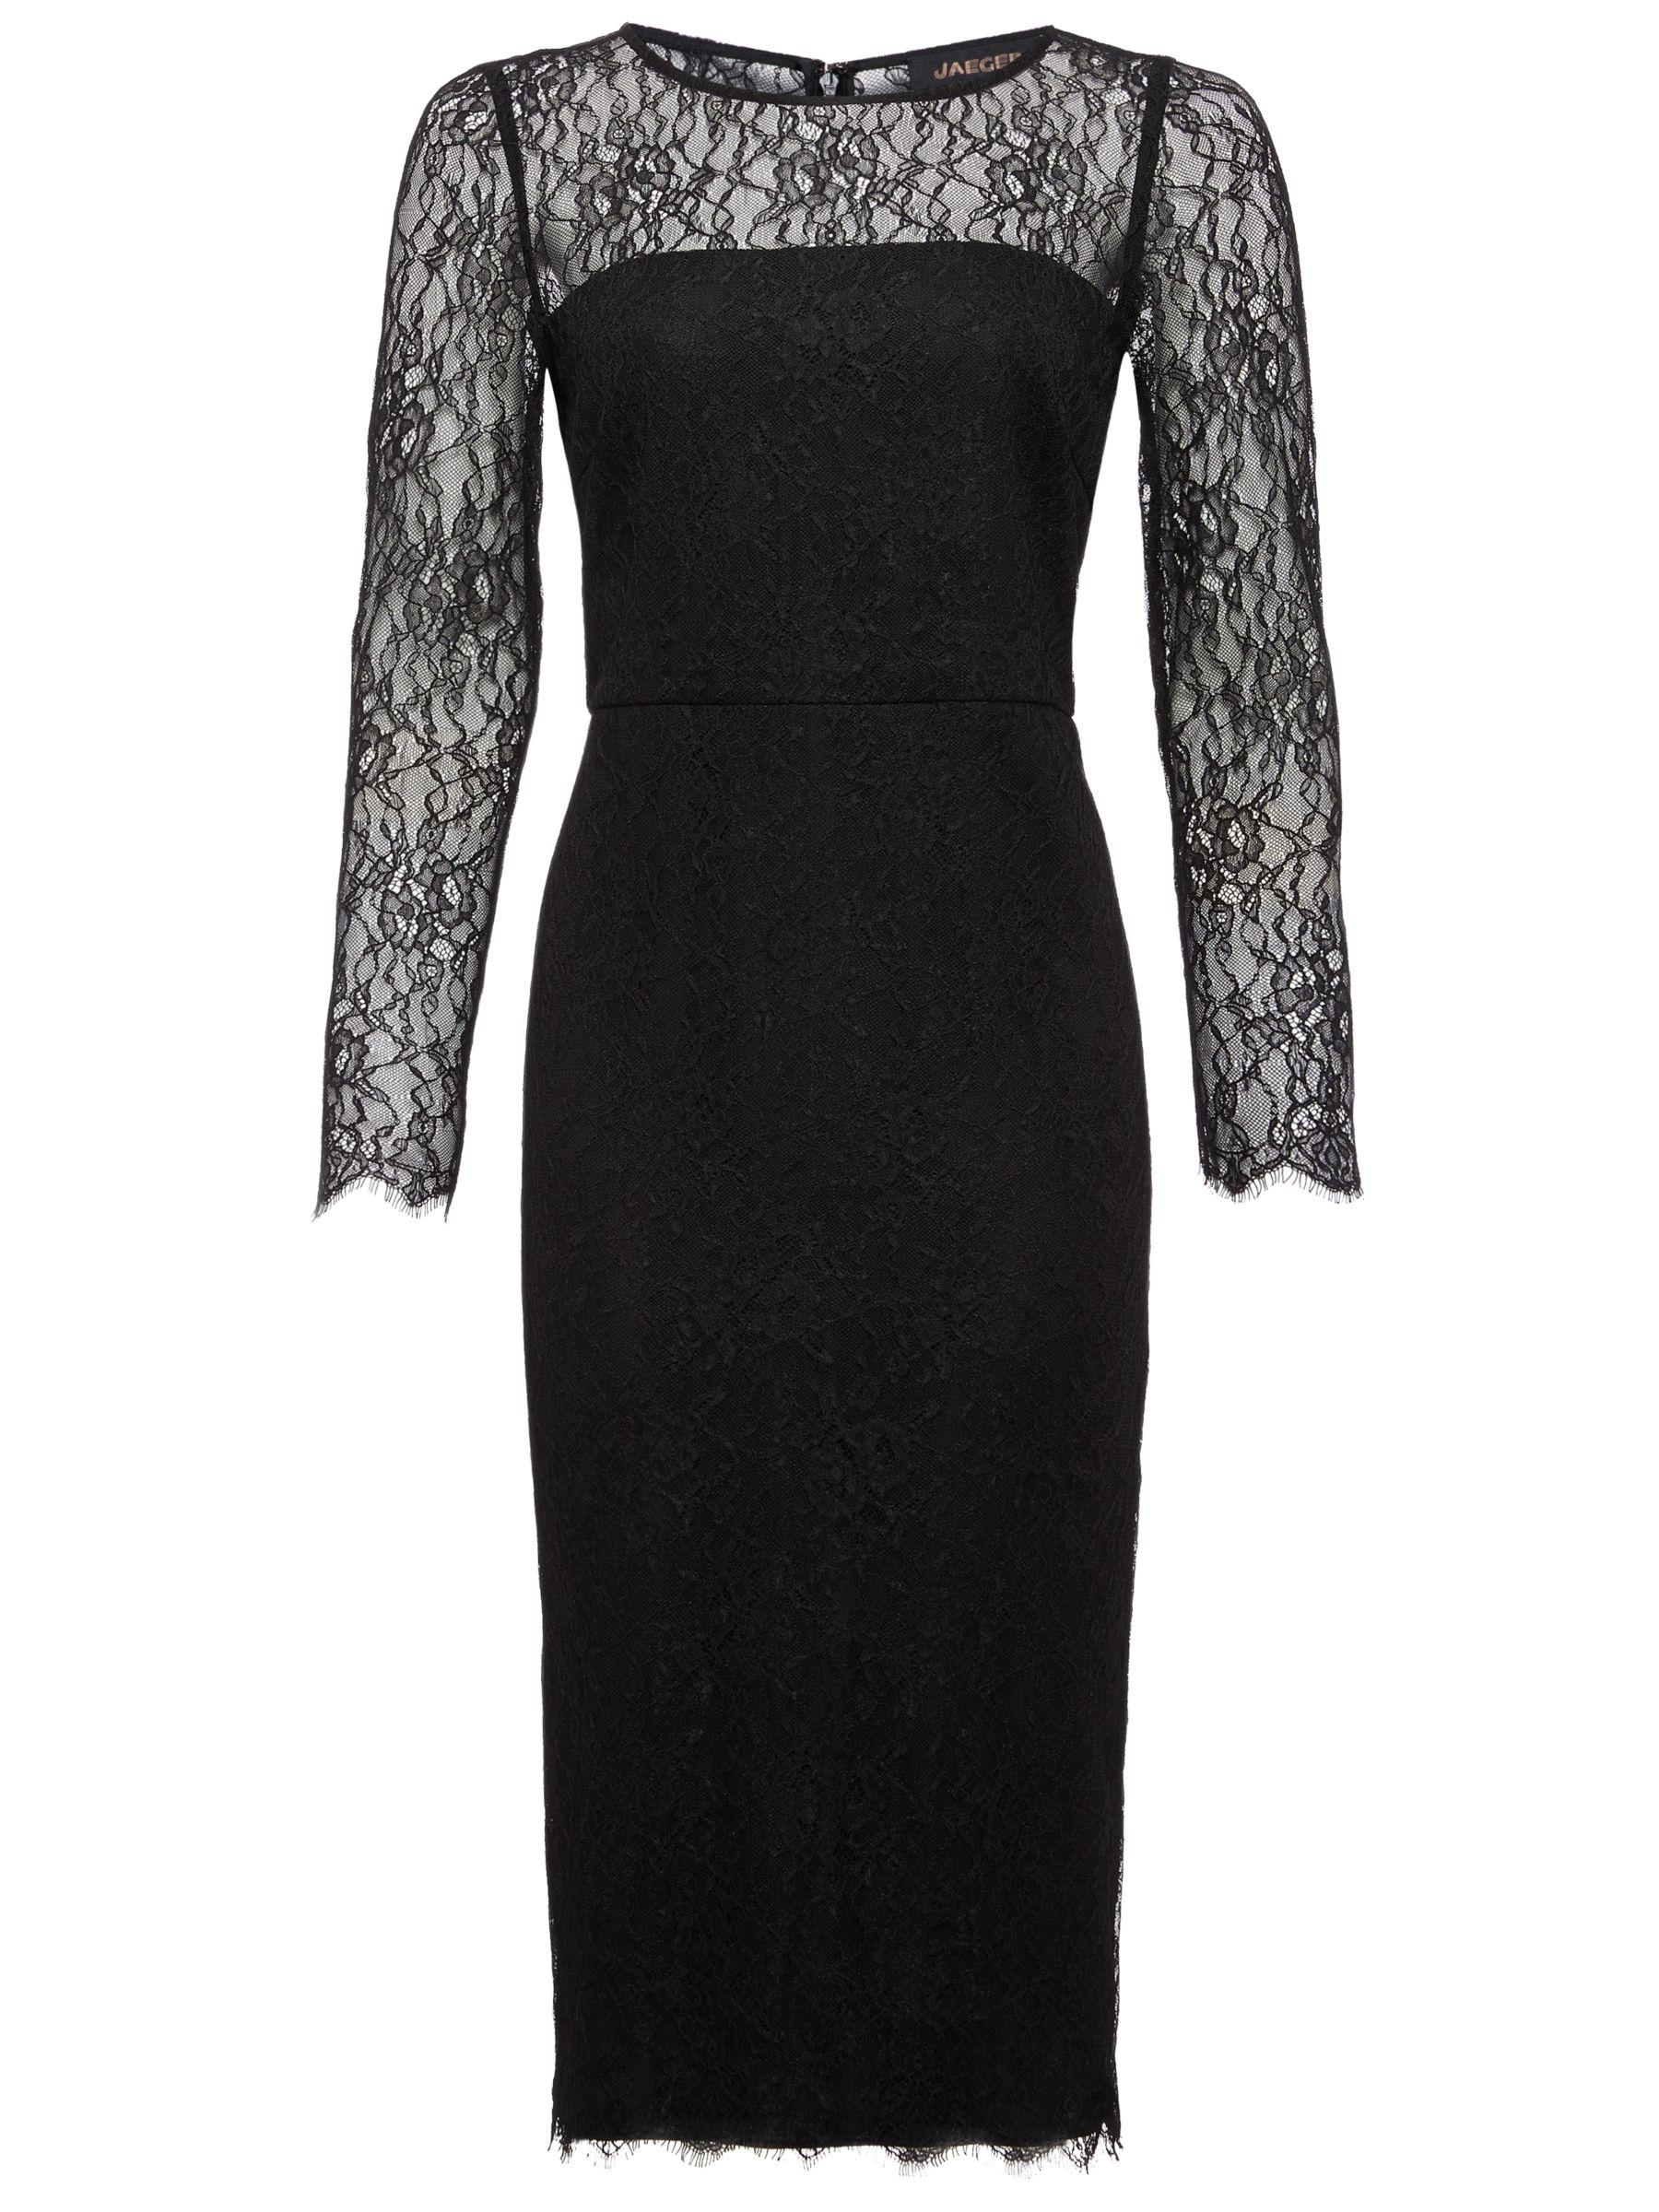 Jaeger All Over Lace Dress, Black